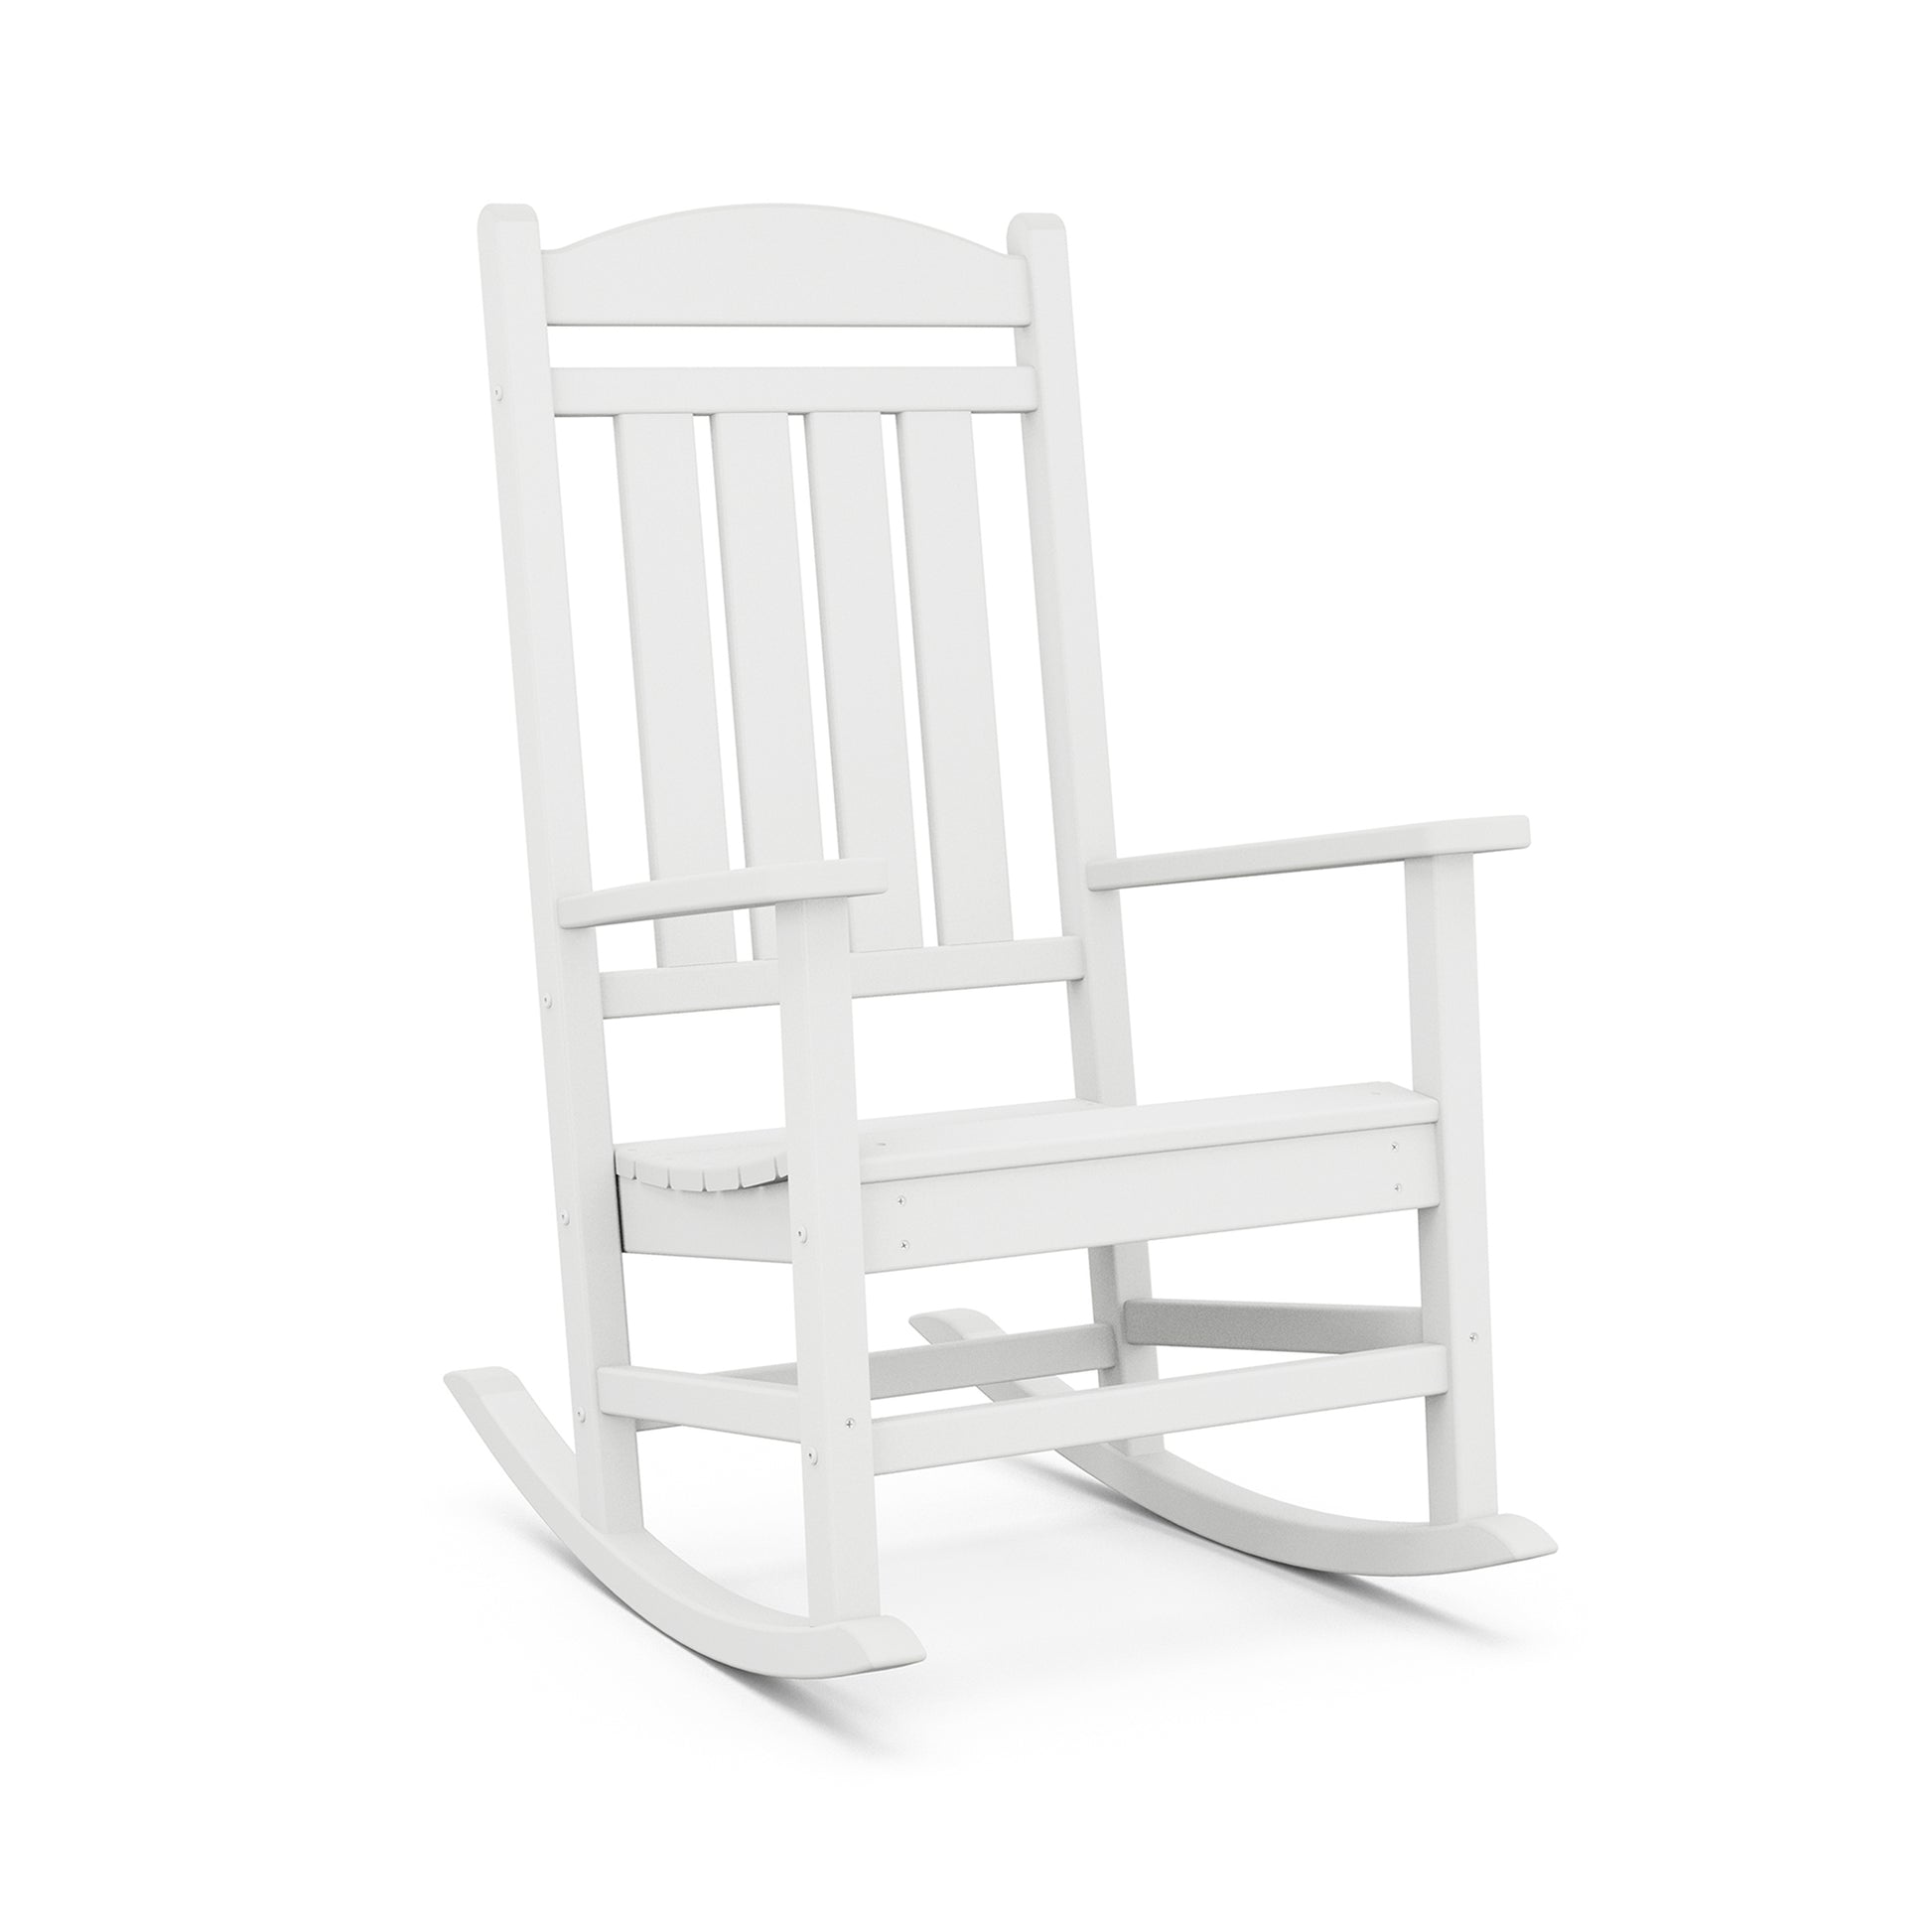 A white POLYWOOD© Presidential Outdoor Rocking Chair isolated on a white background. The chair features a high back with vertical slats and a flat seat, suitable for relaxed seating.